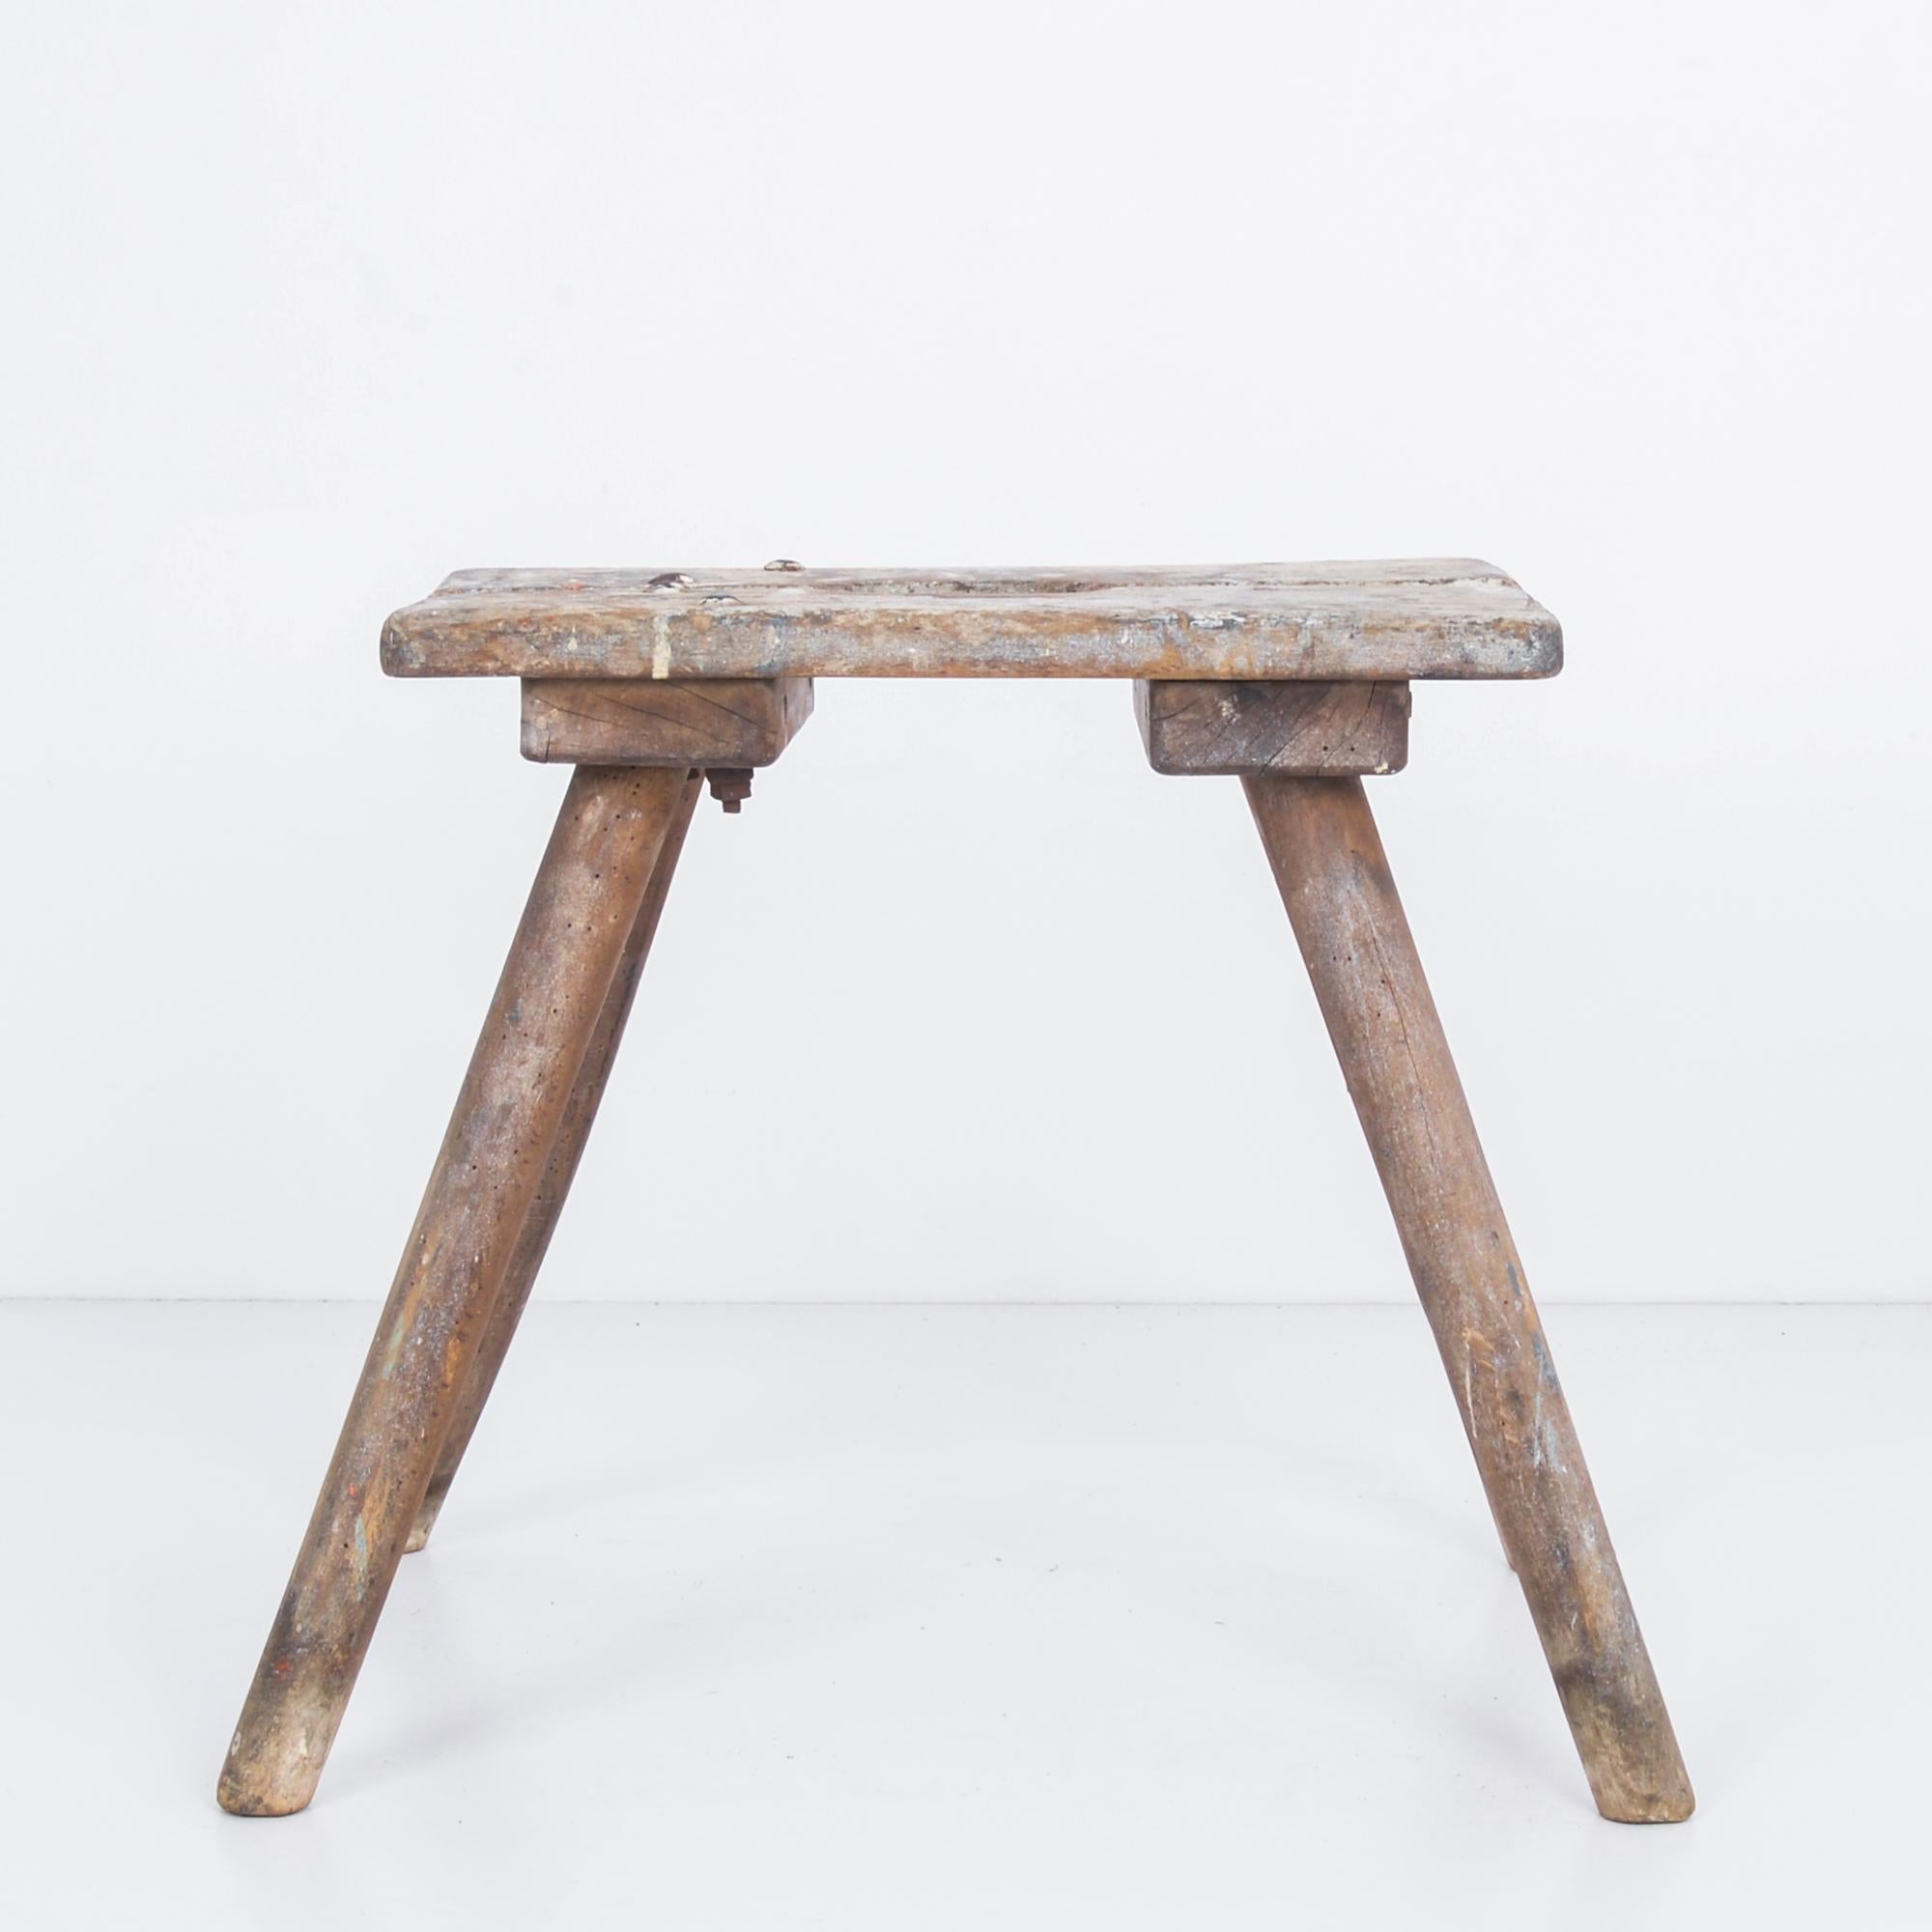 A wooden workman’s stool from Belgium, circa 1950. Four splayed legs support a worn rectangular seat, streaked and spattered with paint. This soft, irregular patina, with variegated grey and white tones, is evocative of this piece’s history of use.